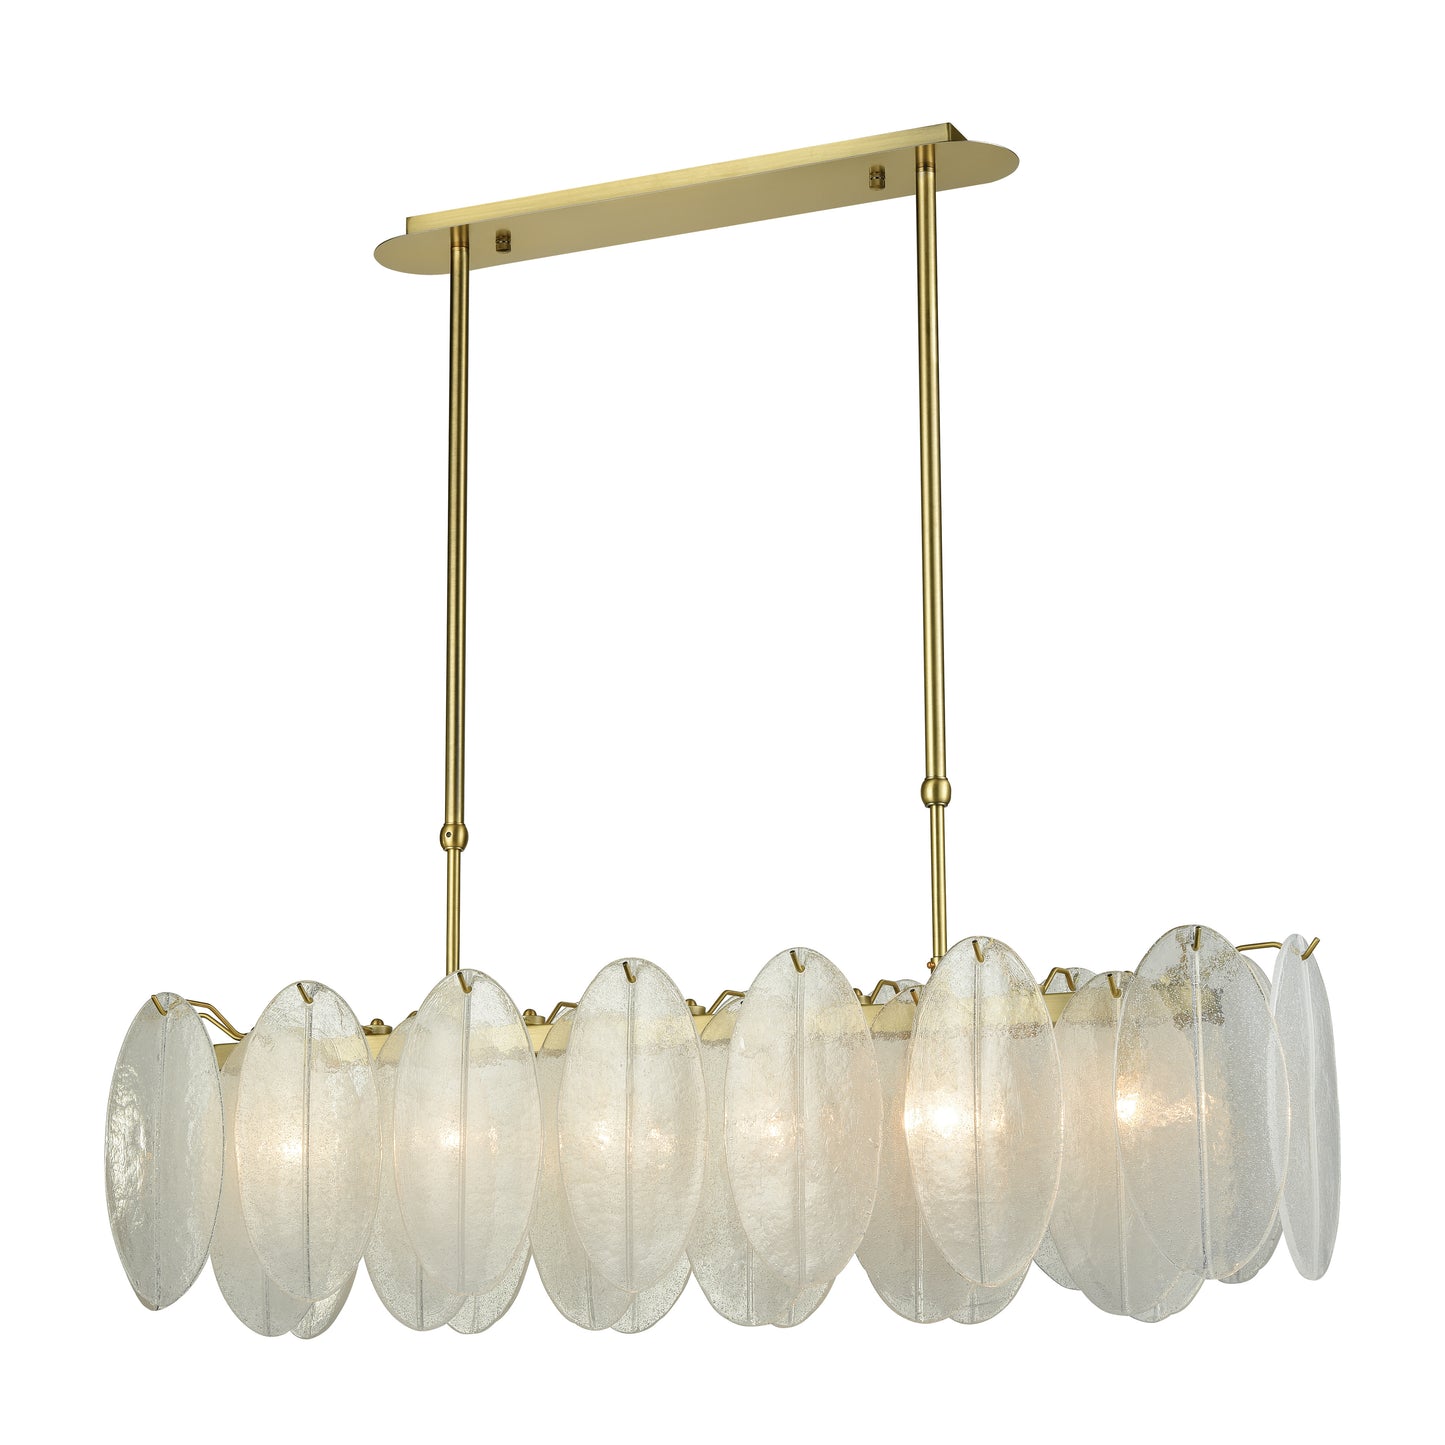 Hush 47'' Wide 6-Light Linear Chandelier - Aged Brass with White